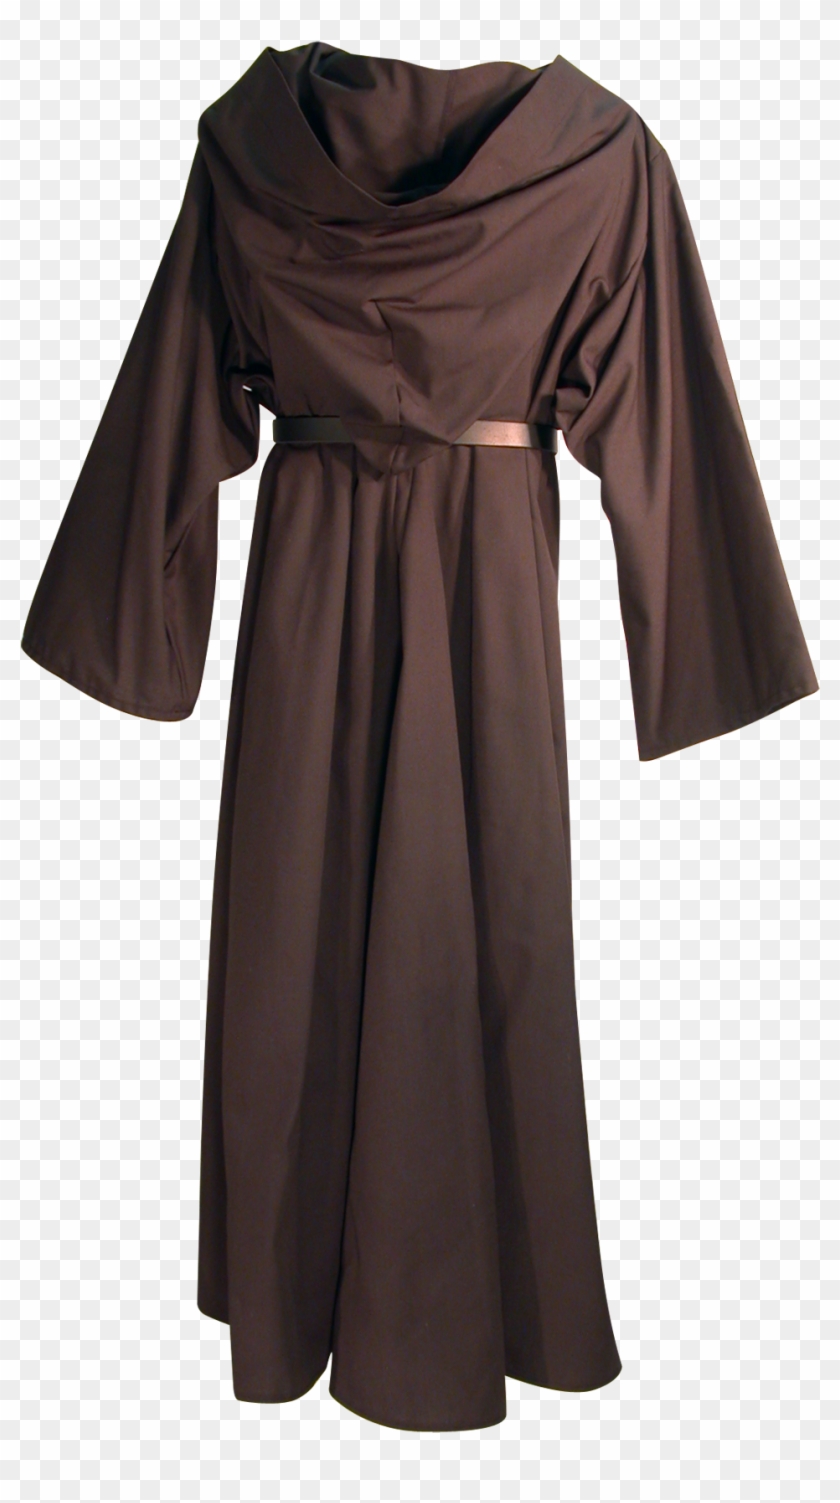 Moonkind Robes Would Be Similar To This - Satin Clipart #5029472